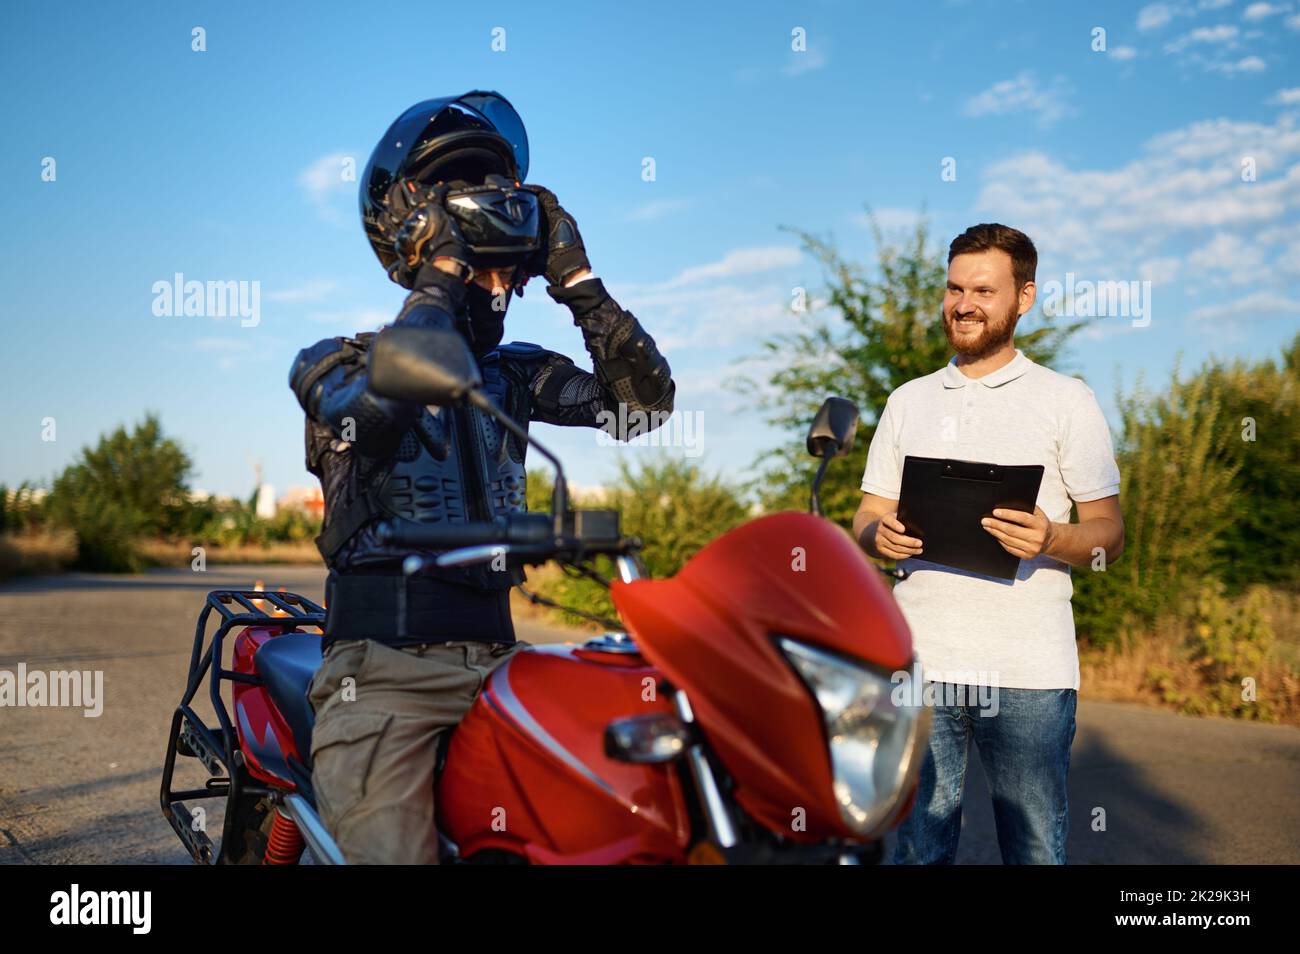 Student and instructor, driving course, motordrome Stock Photo